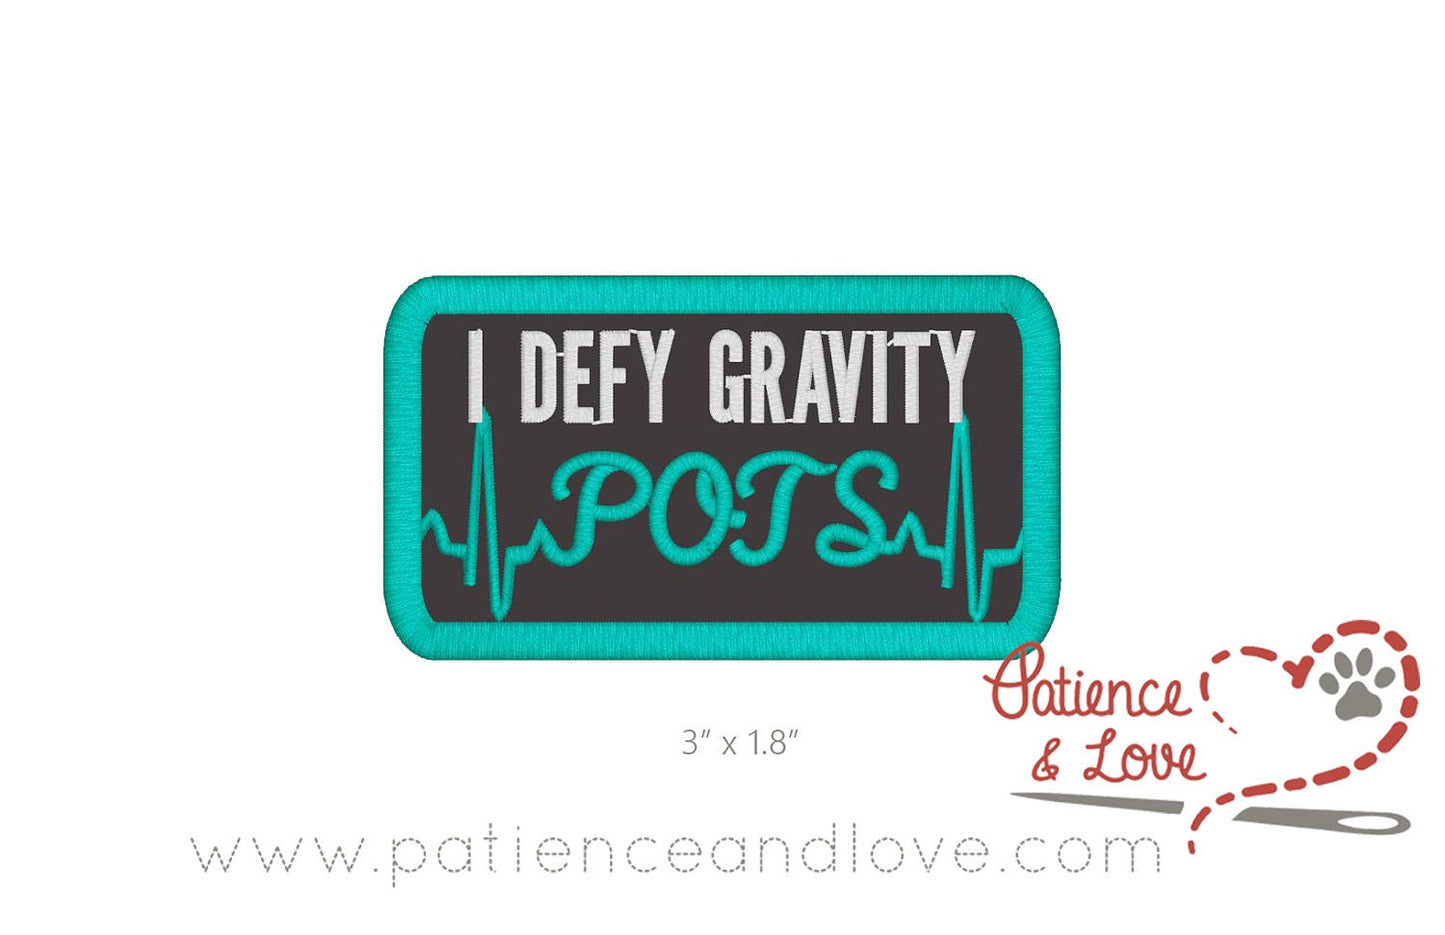 I defy gravity, with POTS as an ekg, 3 x 1.8 inch rectangular patch